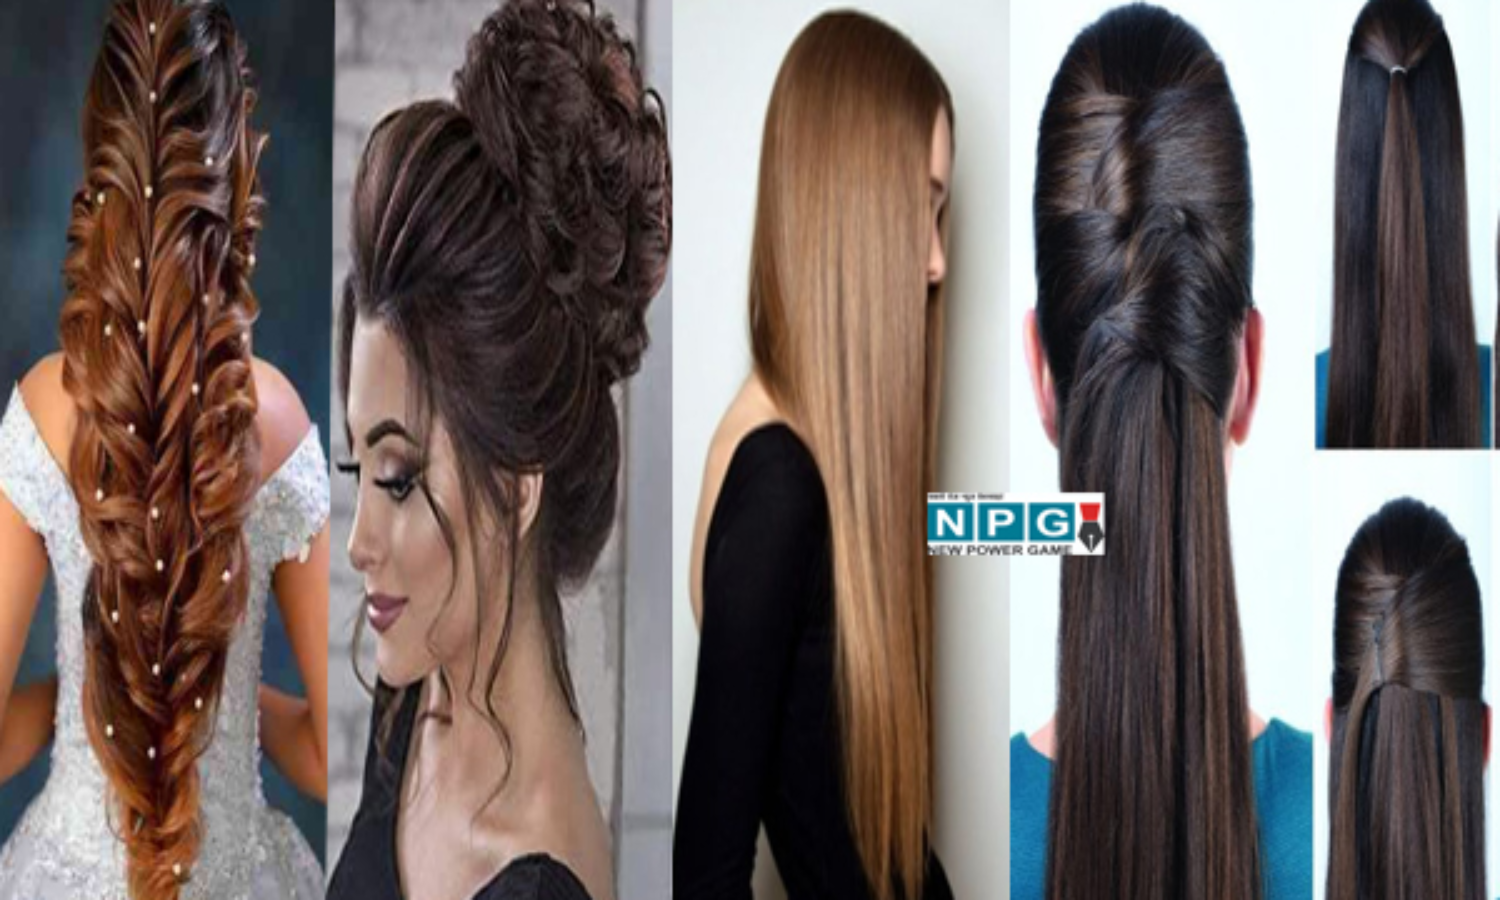 59,904 Simple Hairstyle Images, Stock Photos, 3D objects, & Vectors |  Shutterstock